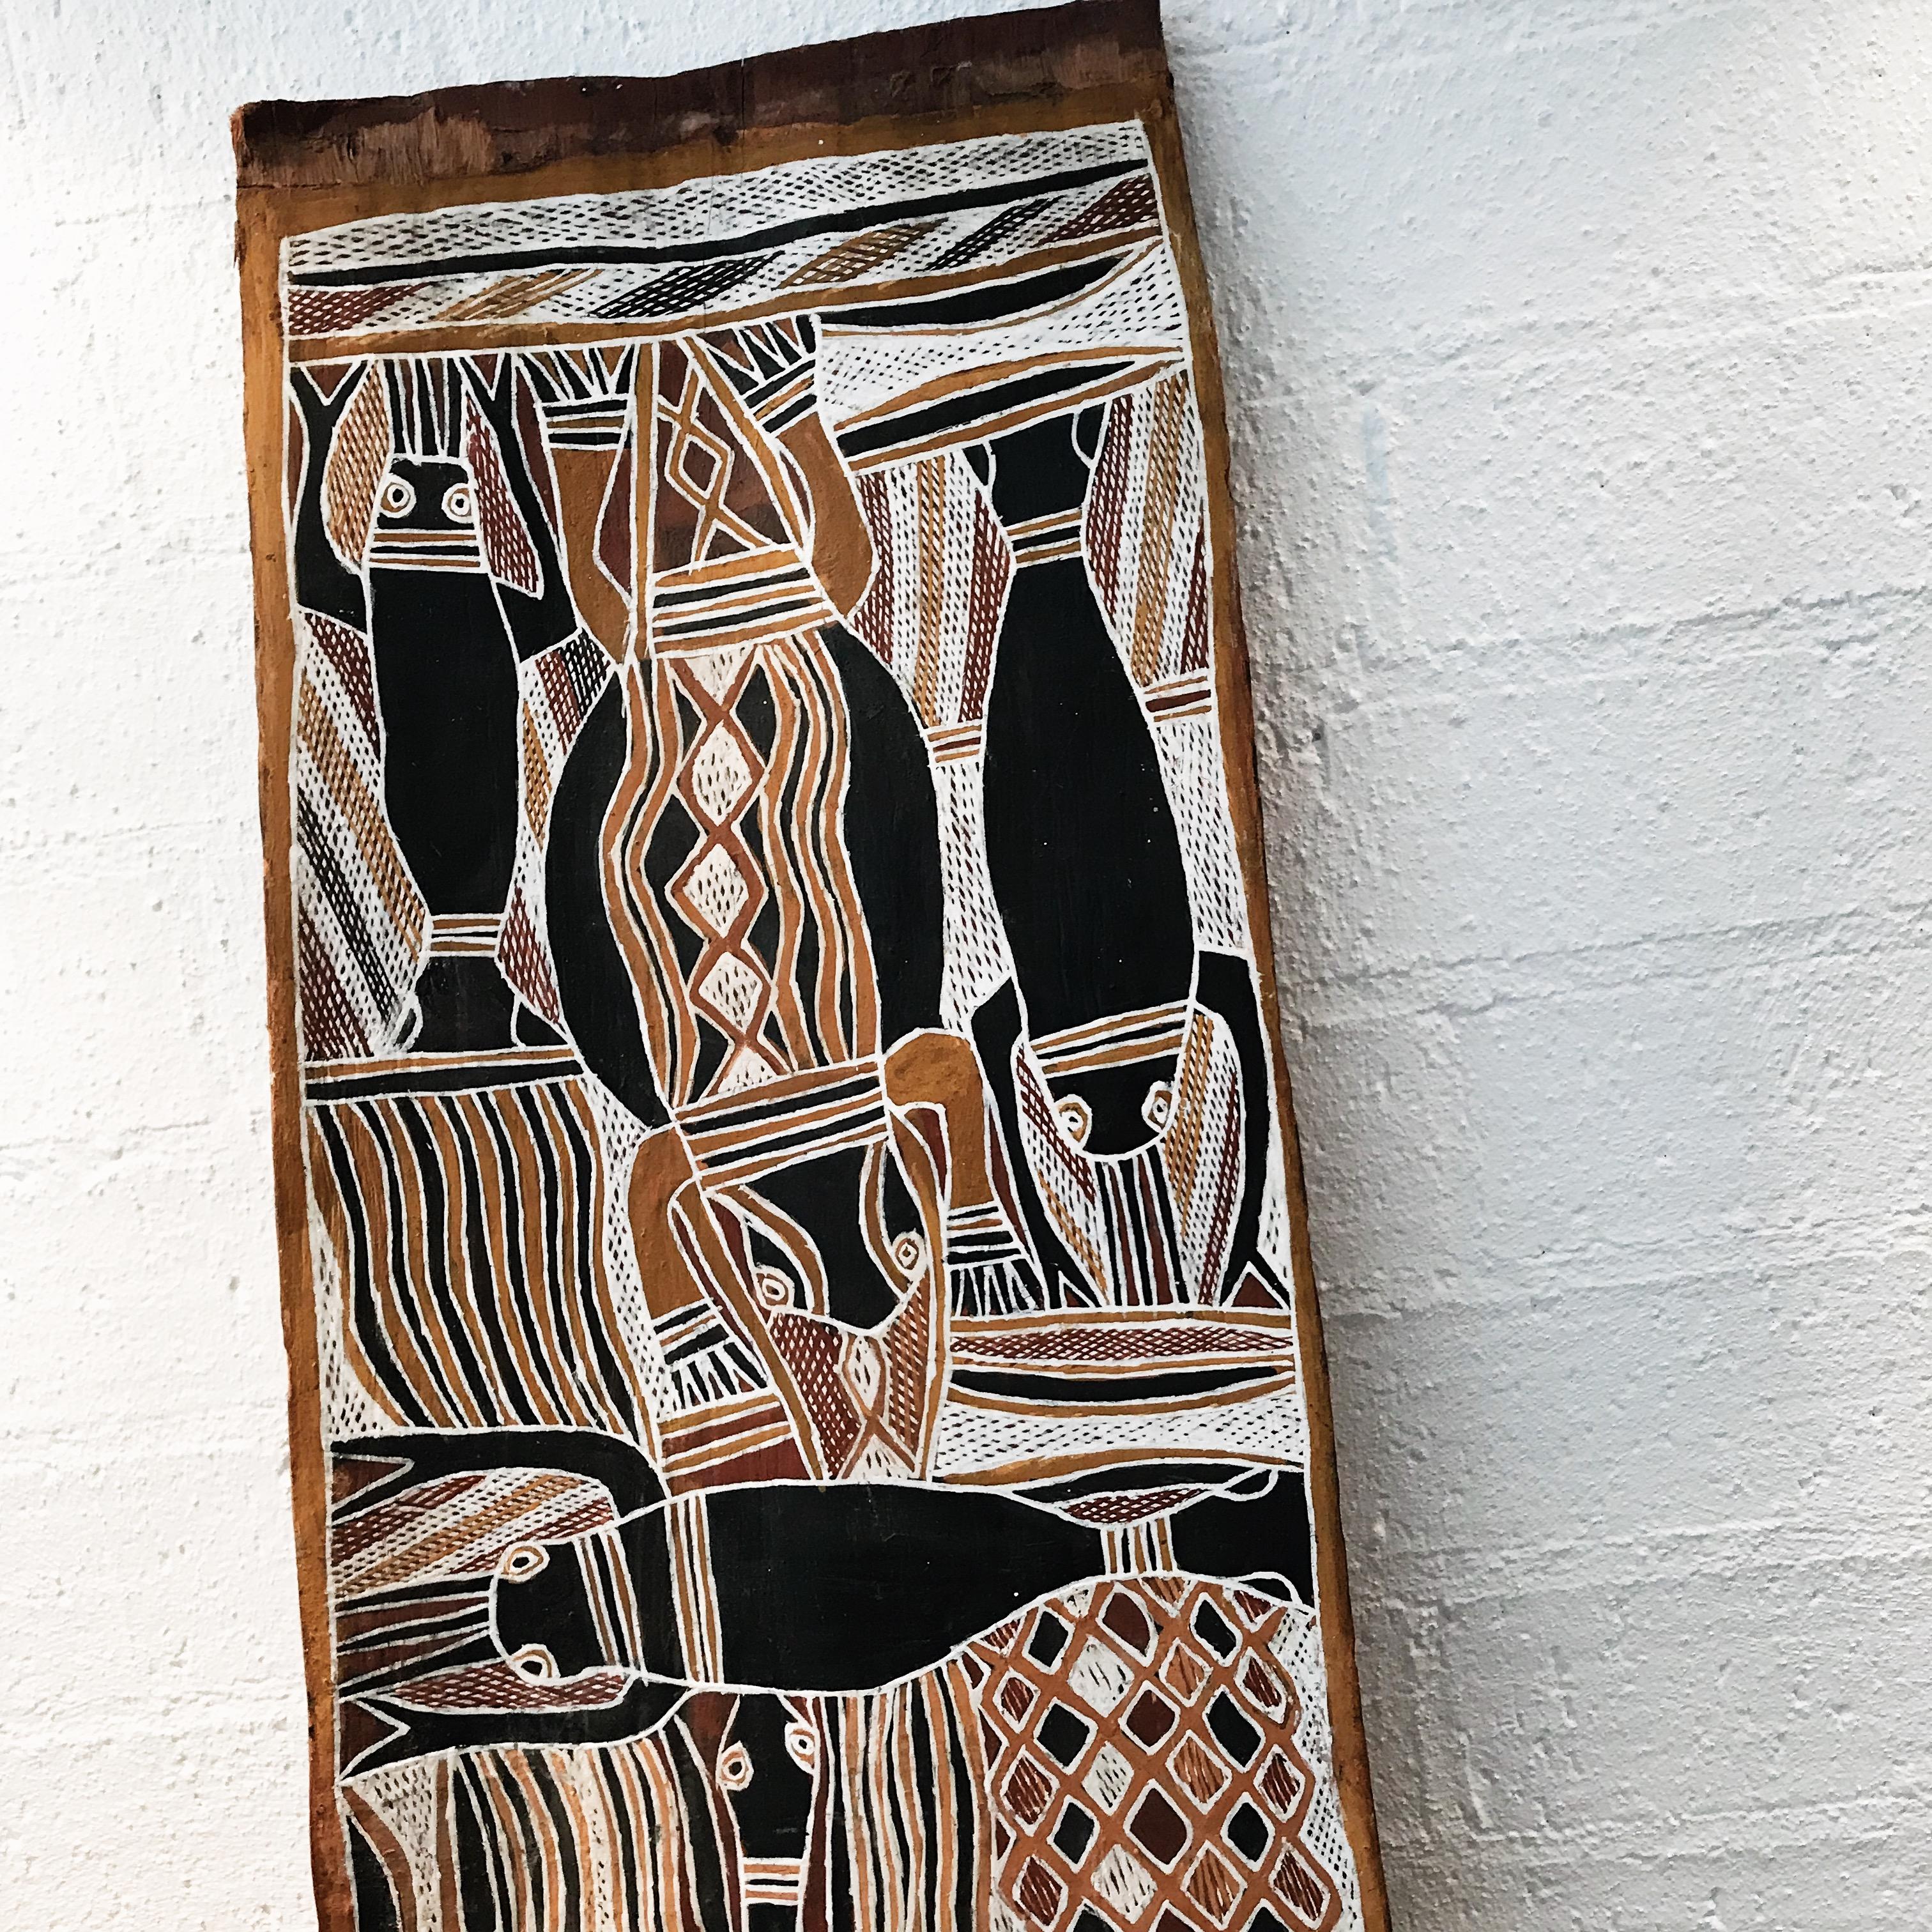 Tribal Aboriginal Stream Painting by Bulambi, Natural Earth Pigments on Eucalyptus Bark For Sale